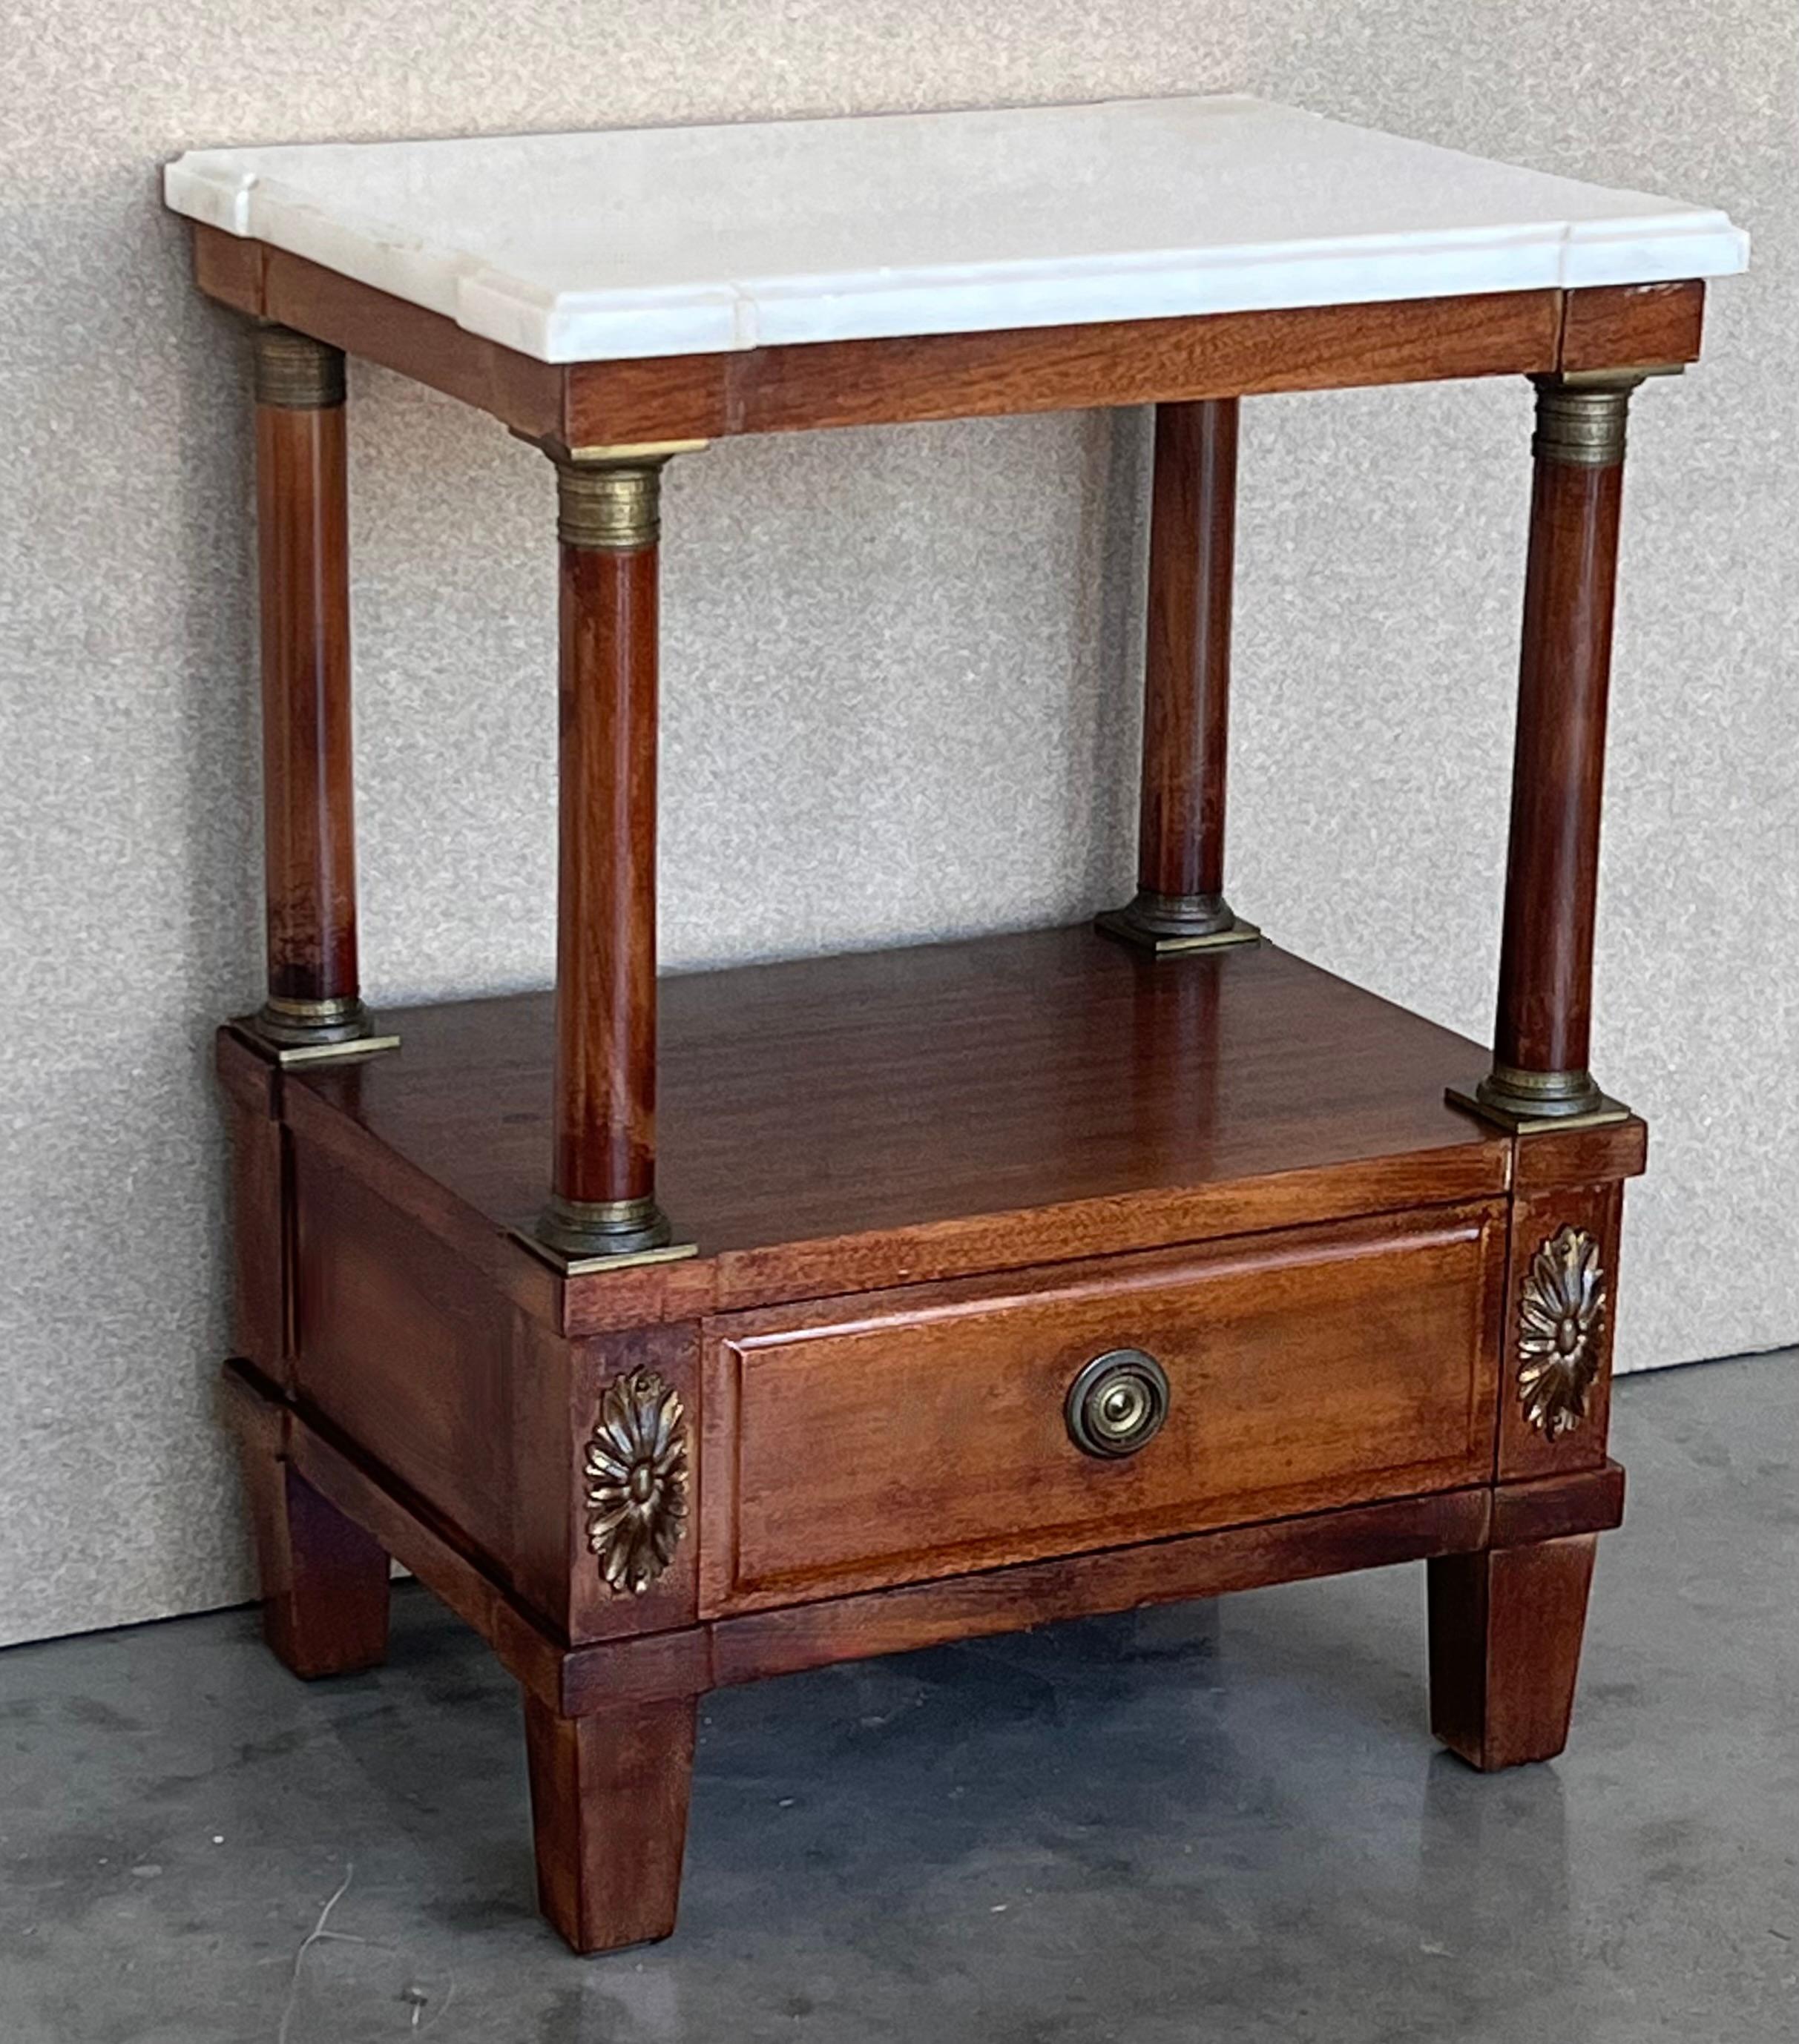 Pair of Empire Style Marble-Top Nightstands with shelve and low drawer In Good Condition For Sale In Miami, FL